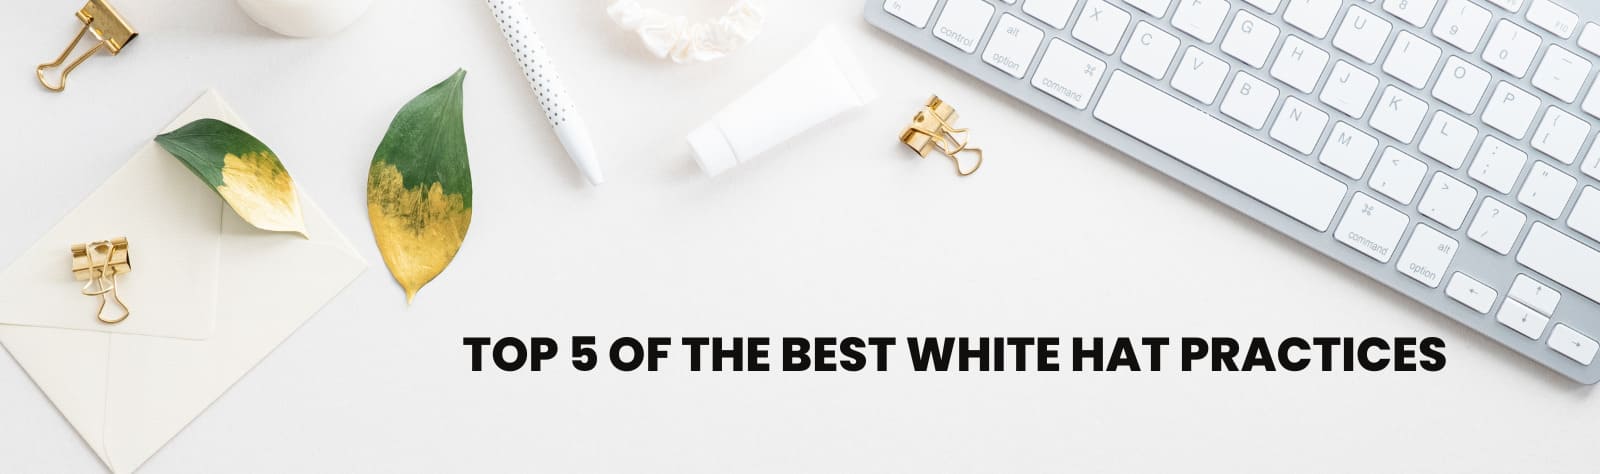 Top 5 of the best white hat practices